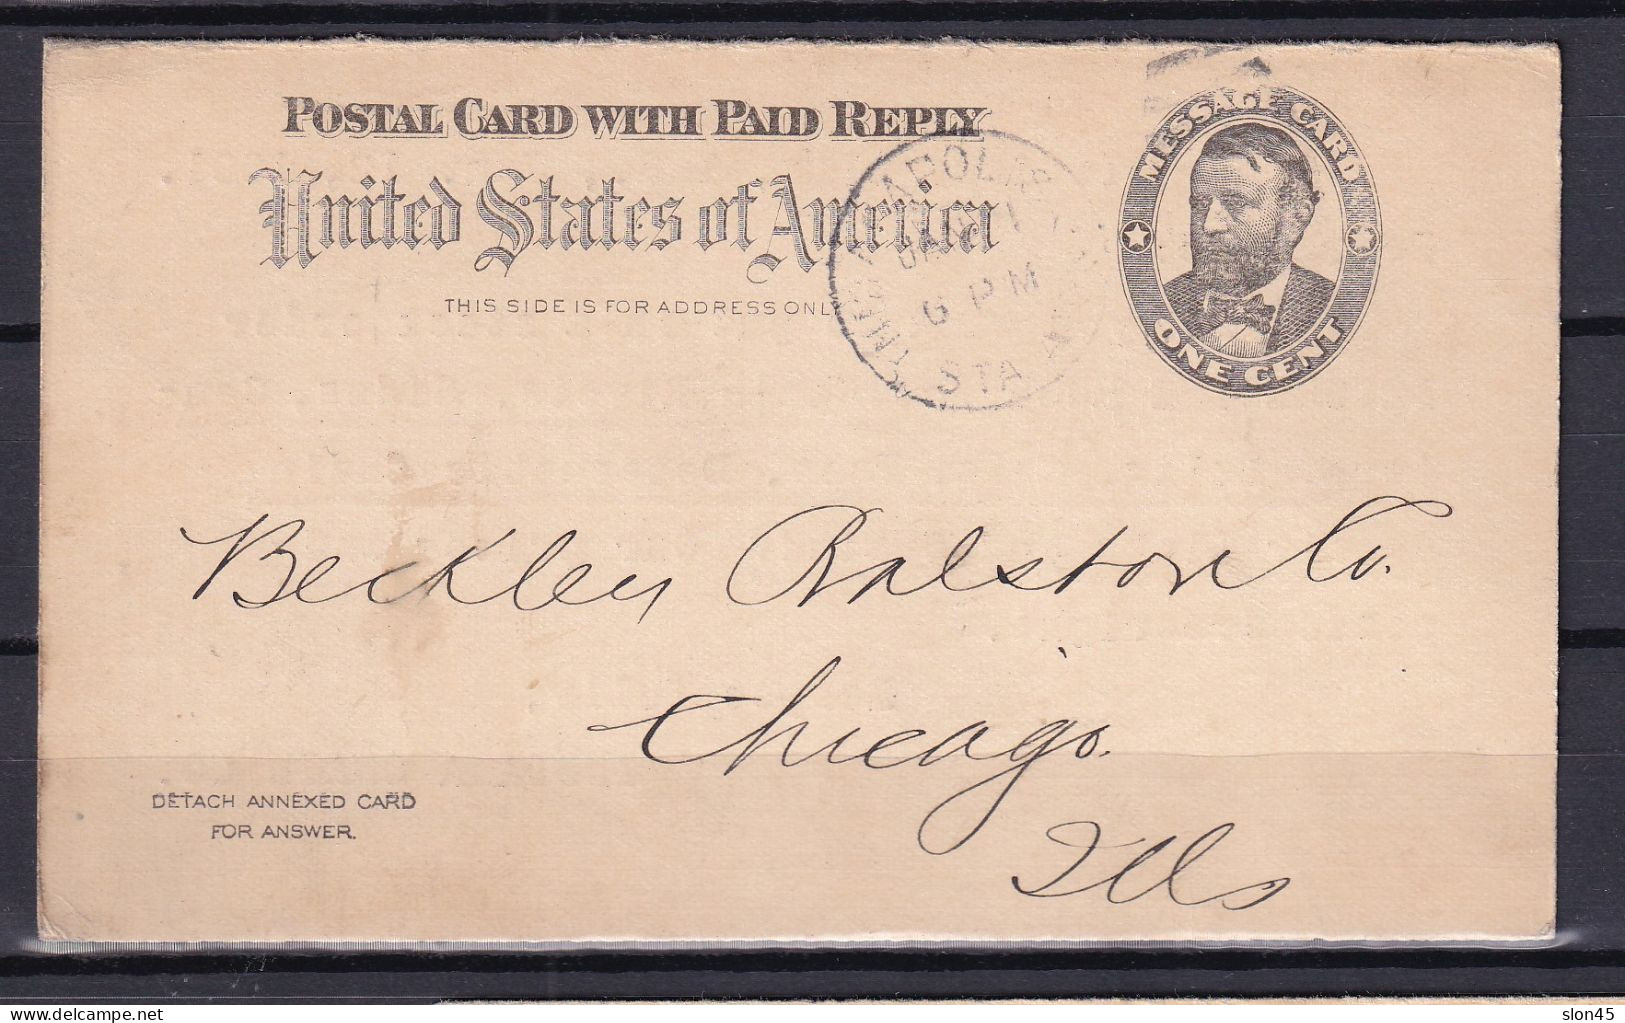 USA 1901 PS Card Grant Sc UY1 Indiana Chain Co 15911 - 1901-20